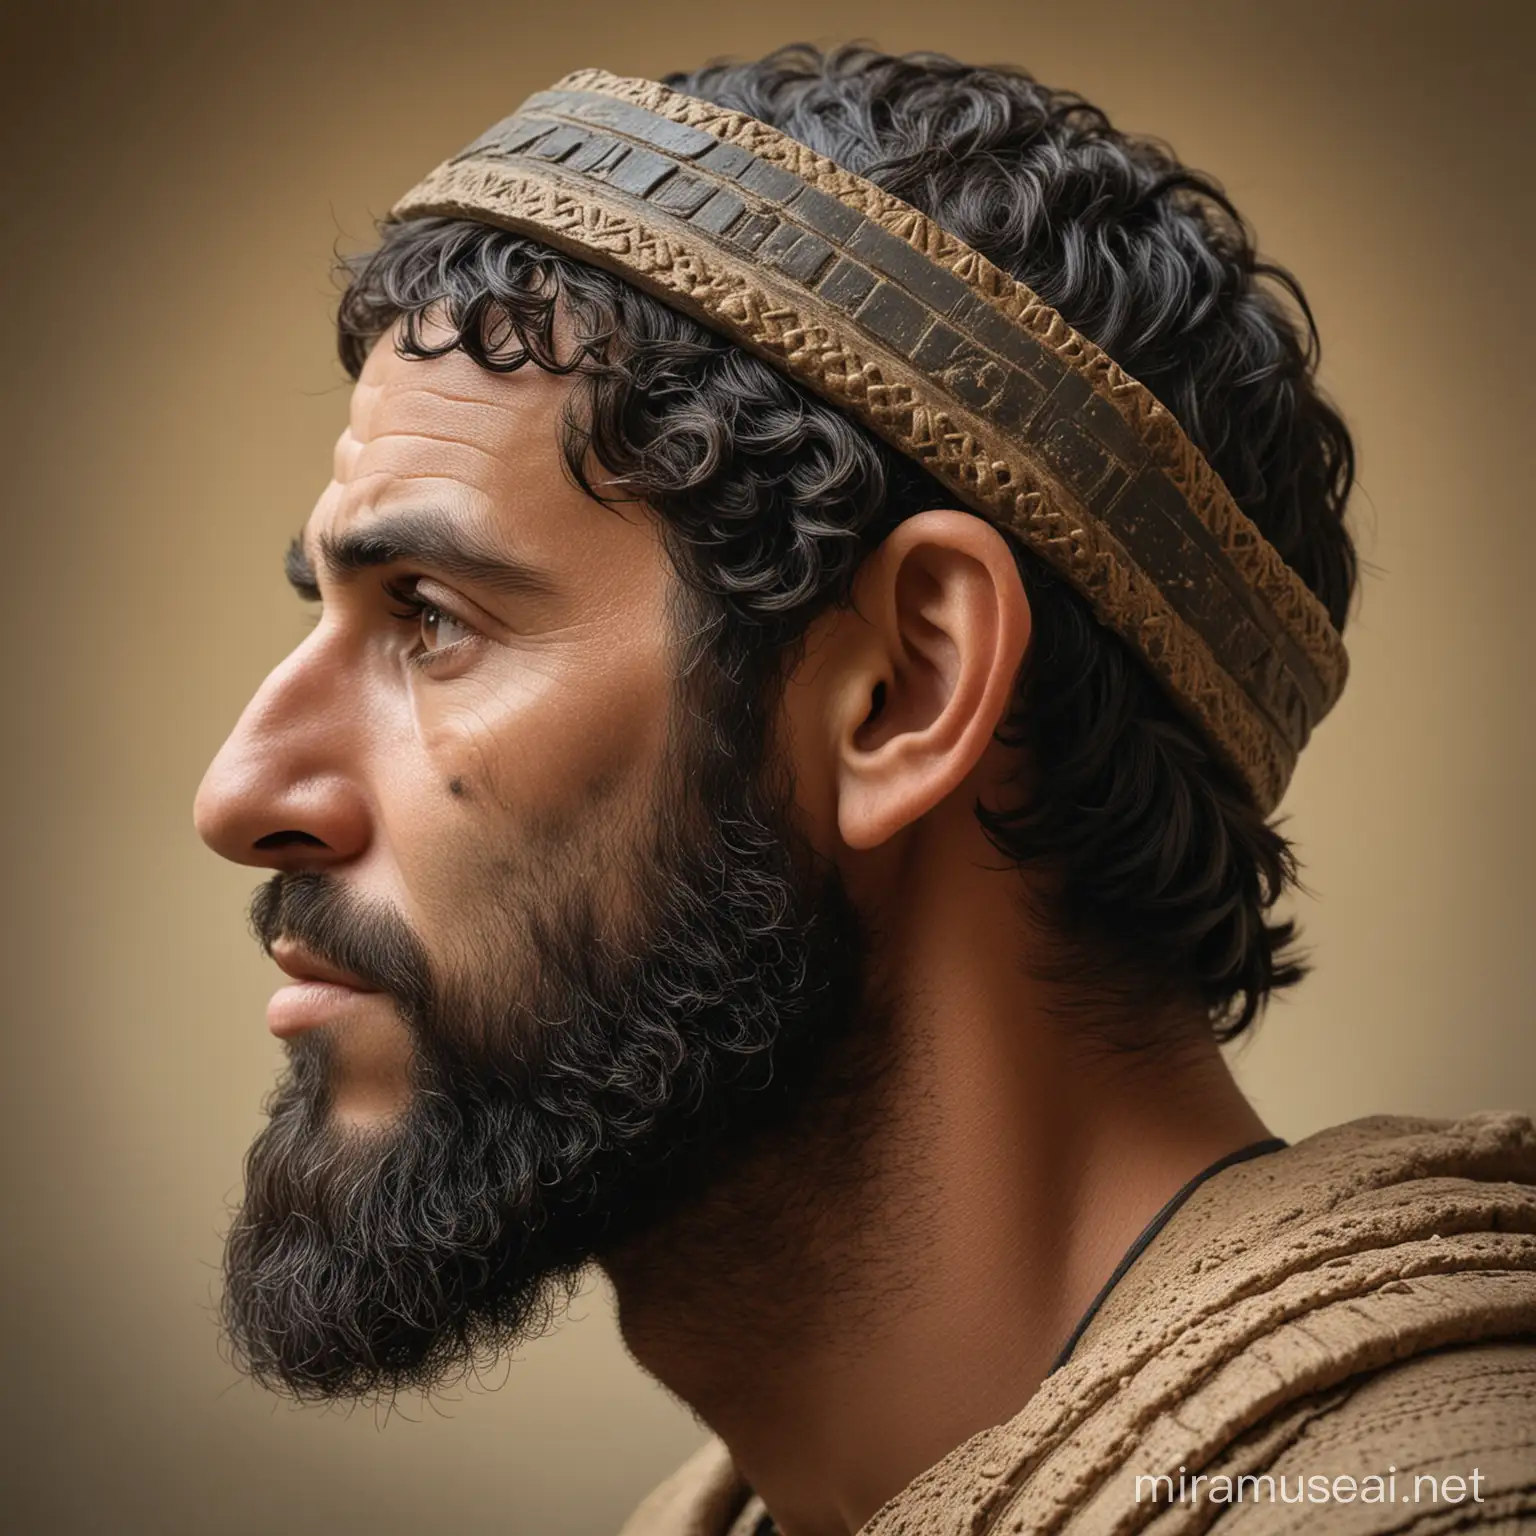 profile view of ancient babylonian man with somber look on his face
